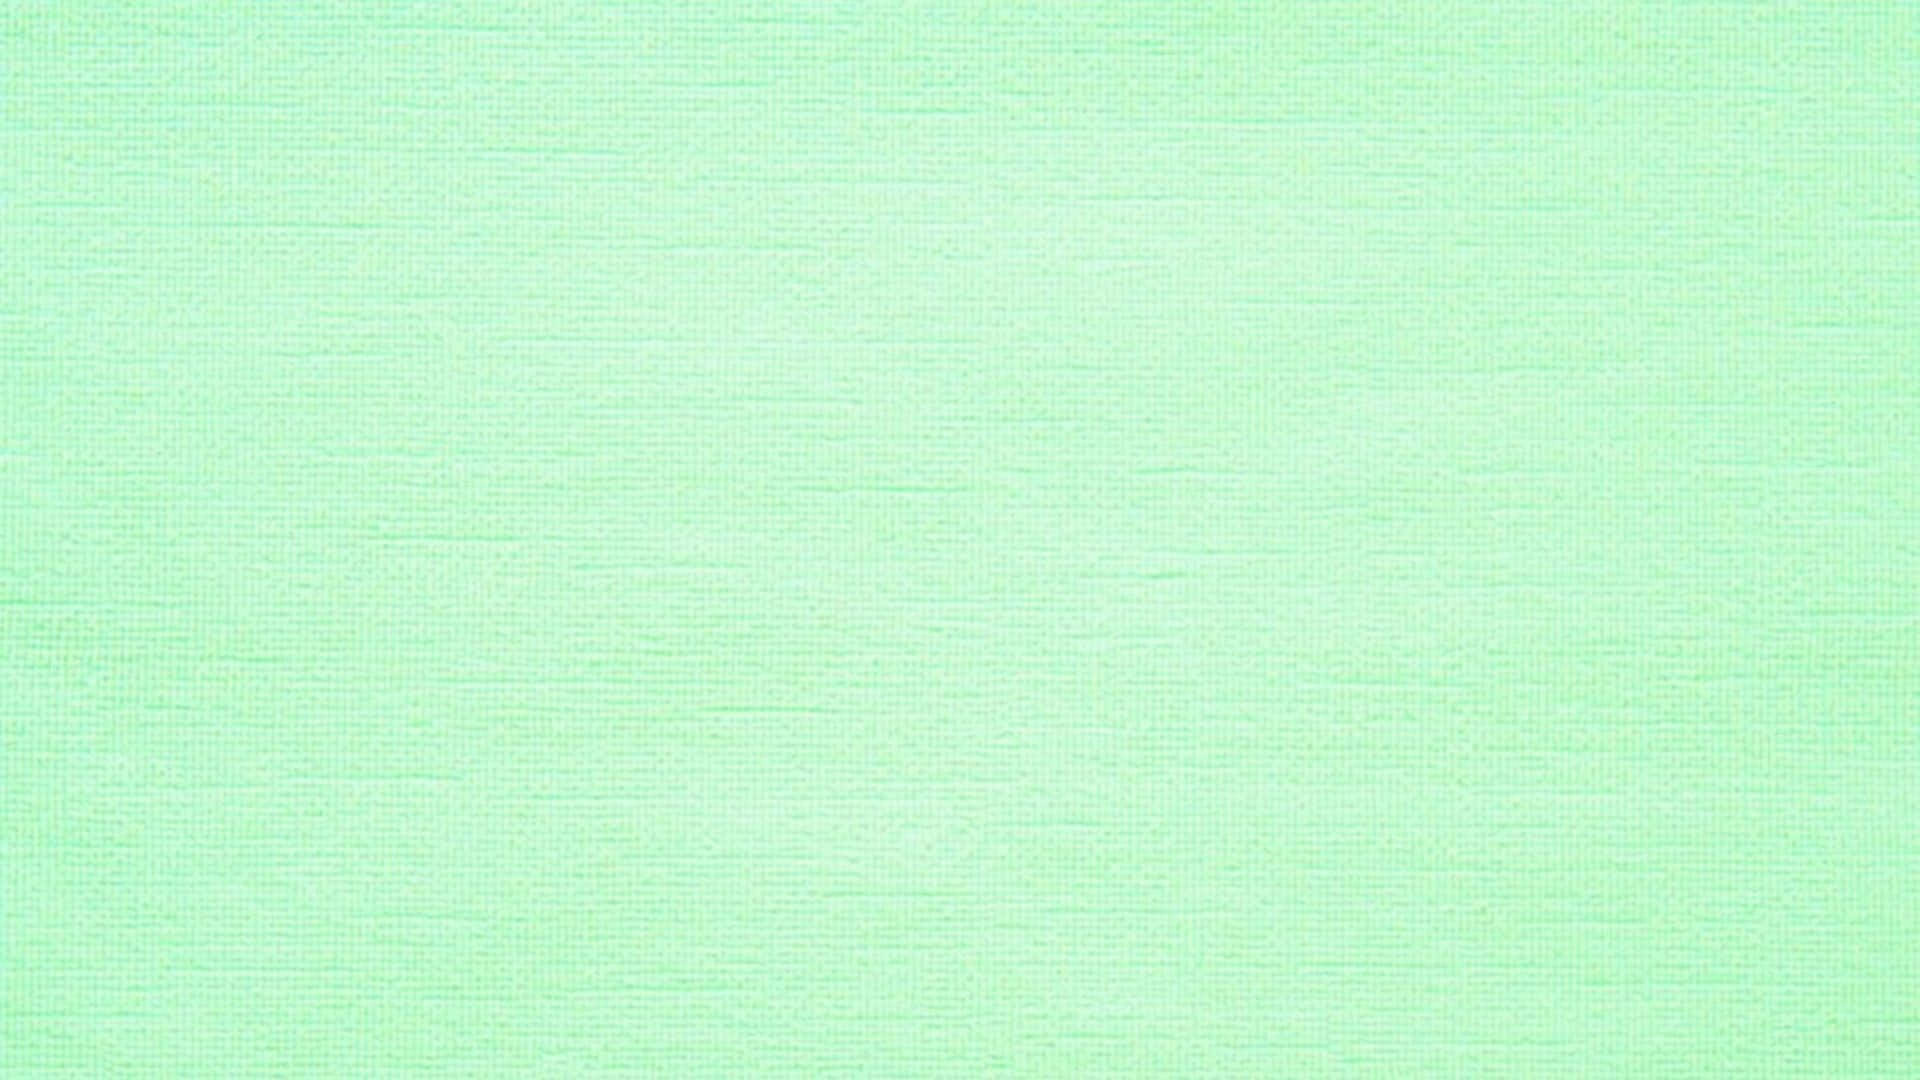 A calming visual of a beautiful Mint Green background.